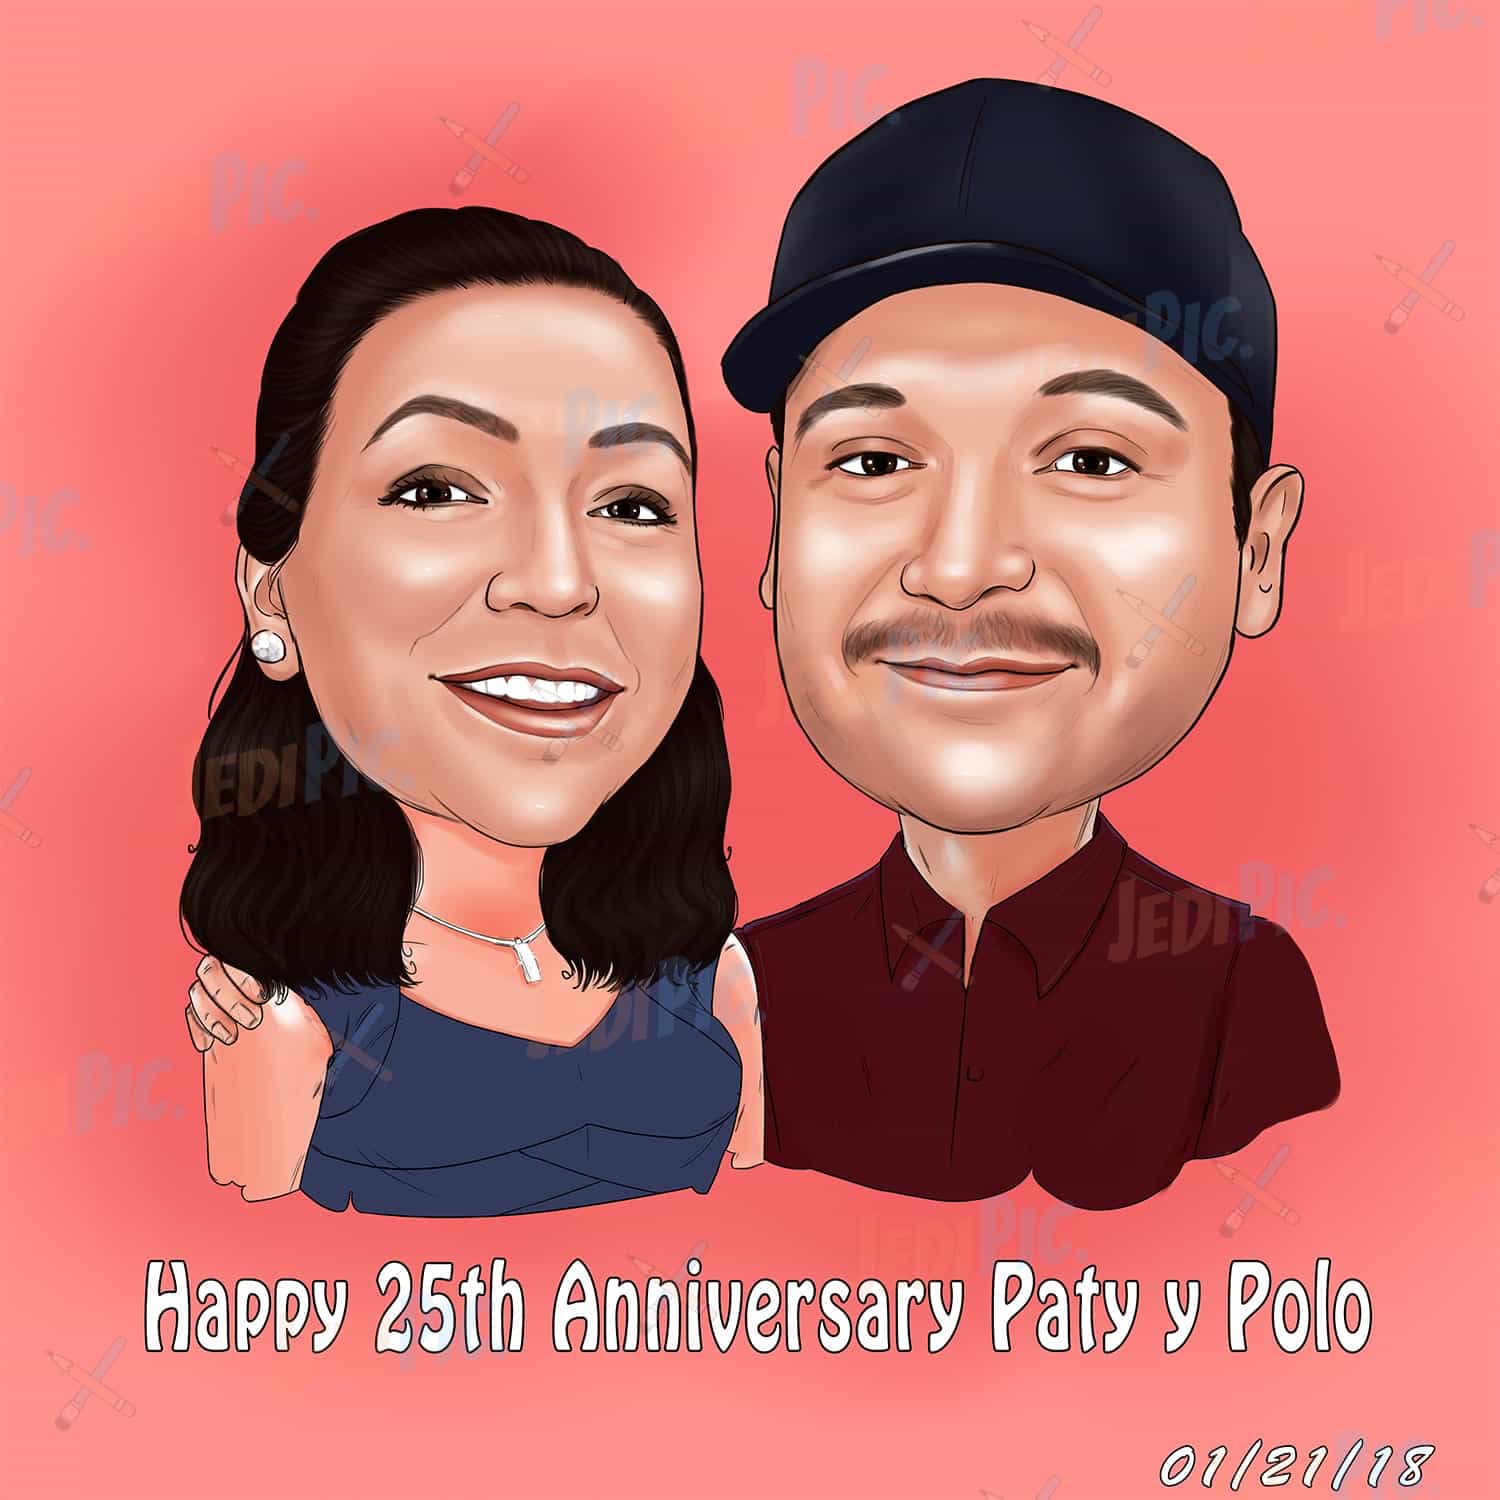 Couple Cartoon Portrait with Personalized Writing